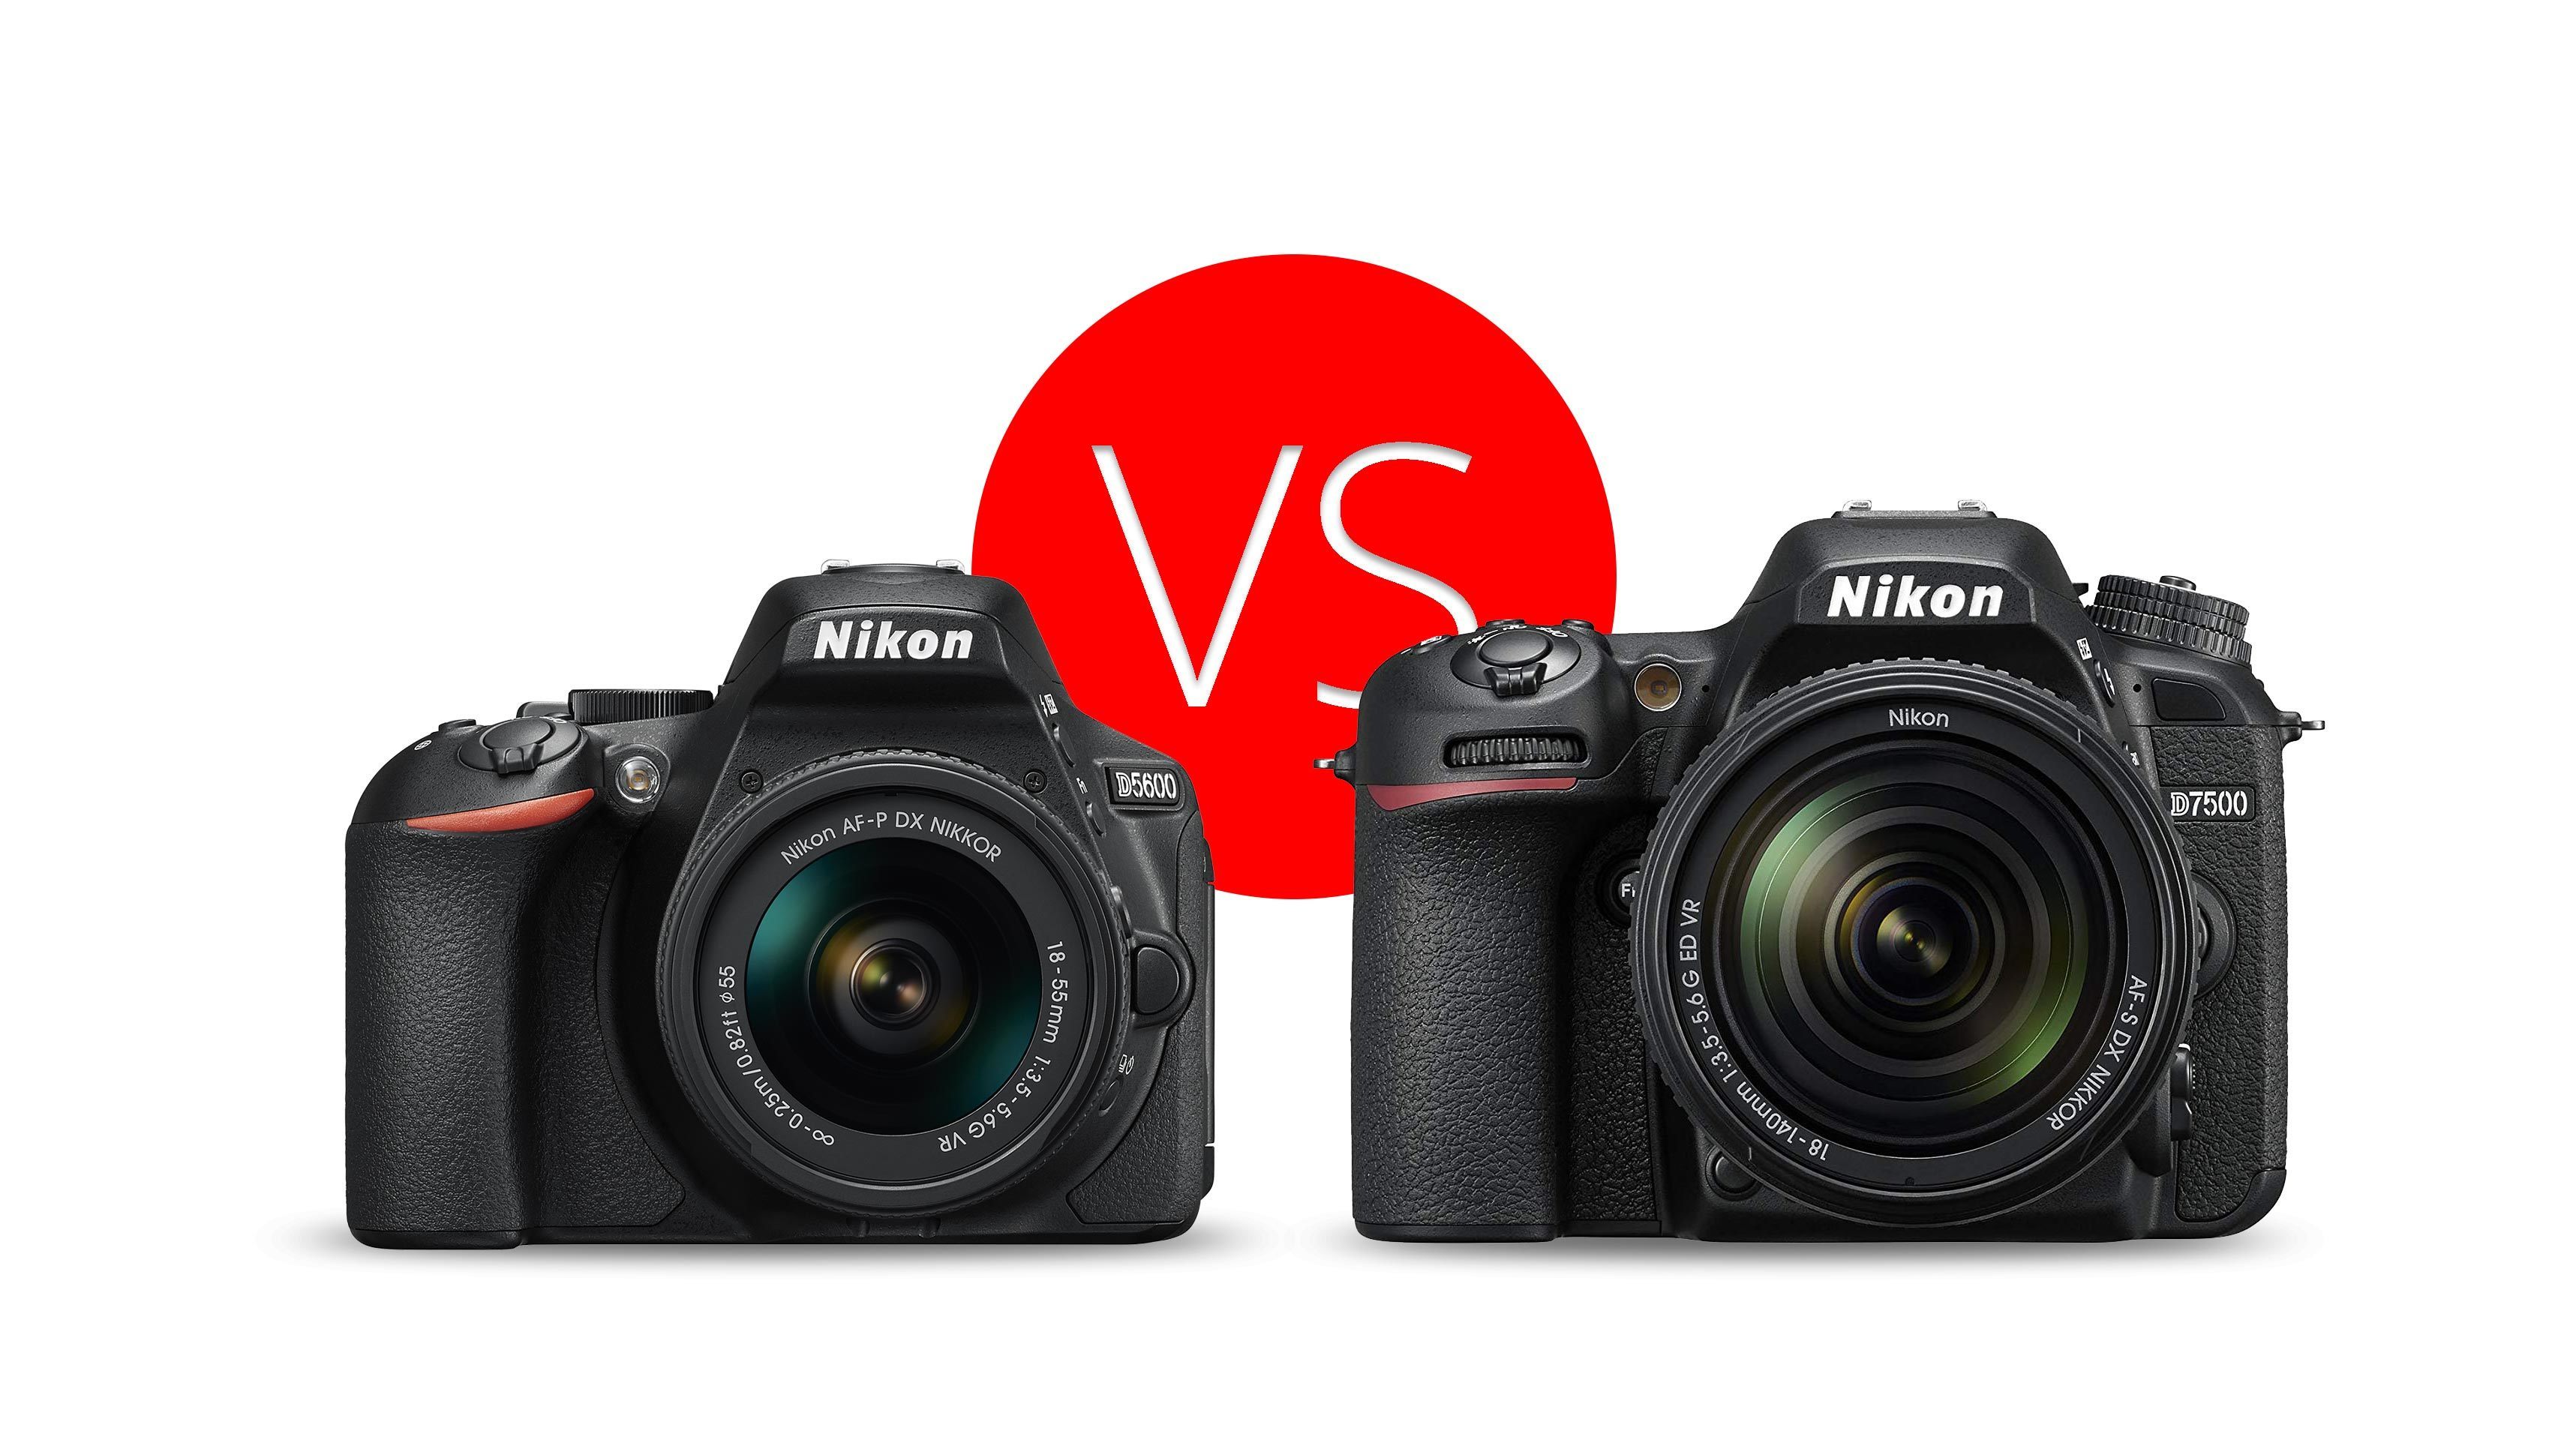 Nikon D5600 vs D7500: Which Should You Buy? - Light And Matter